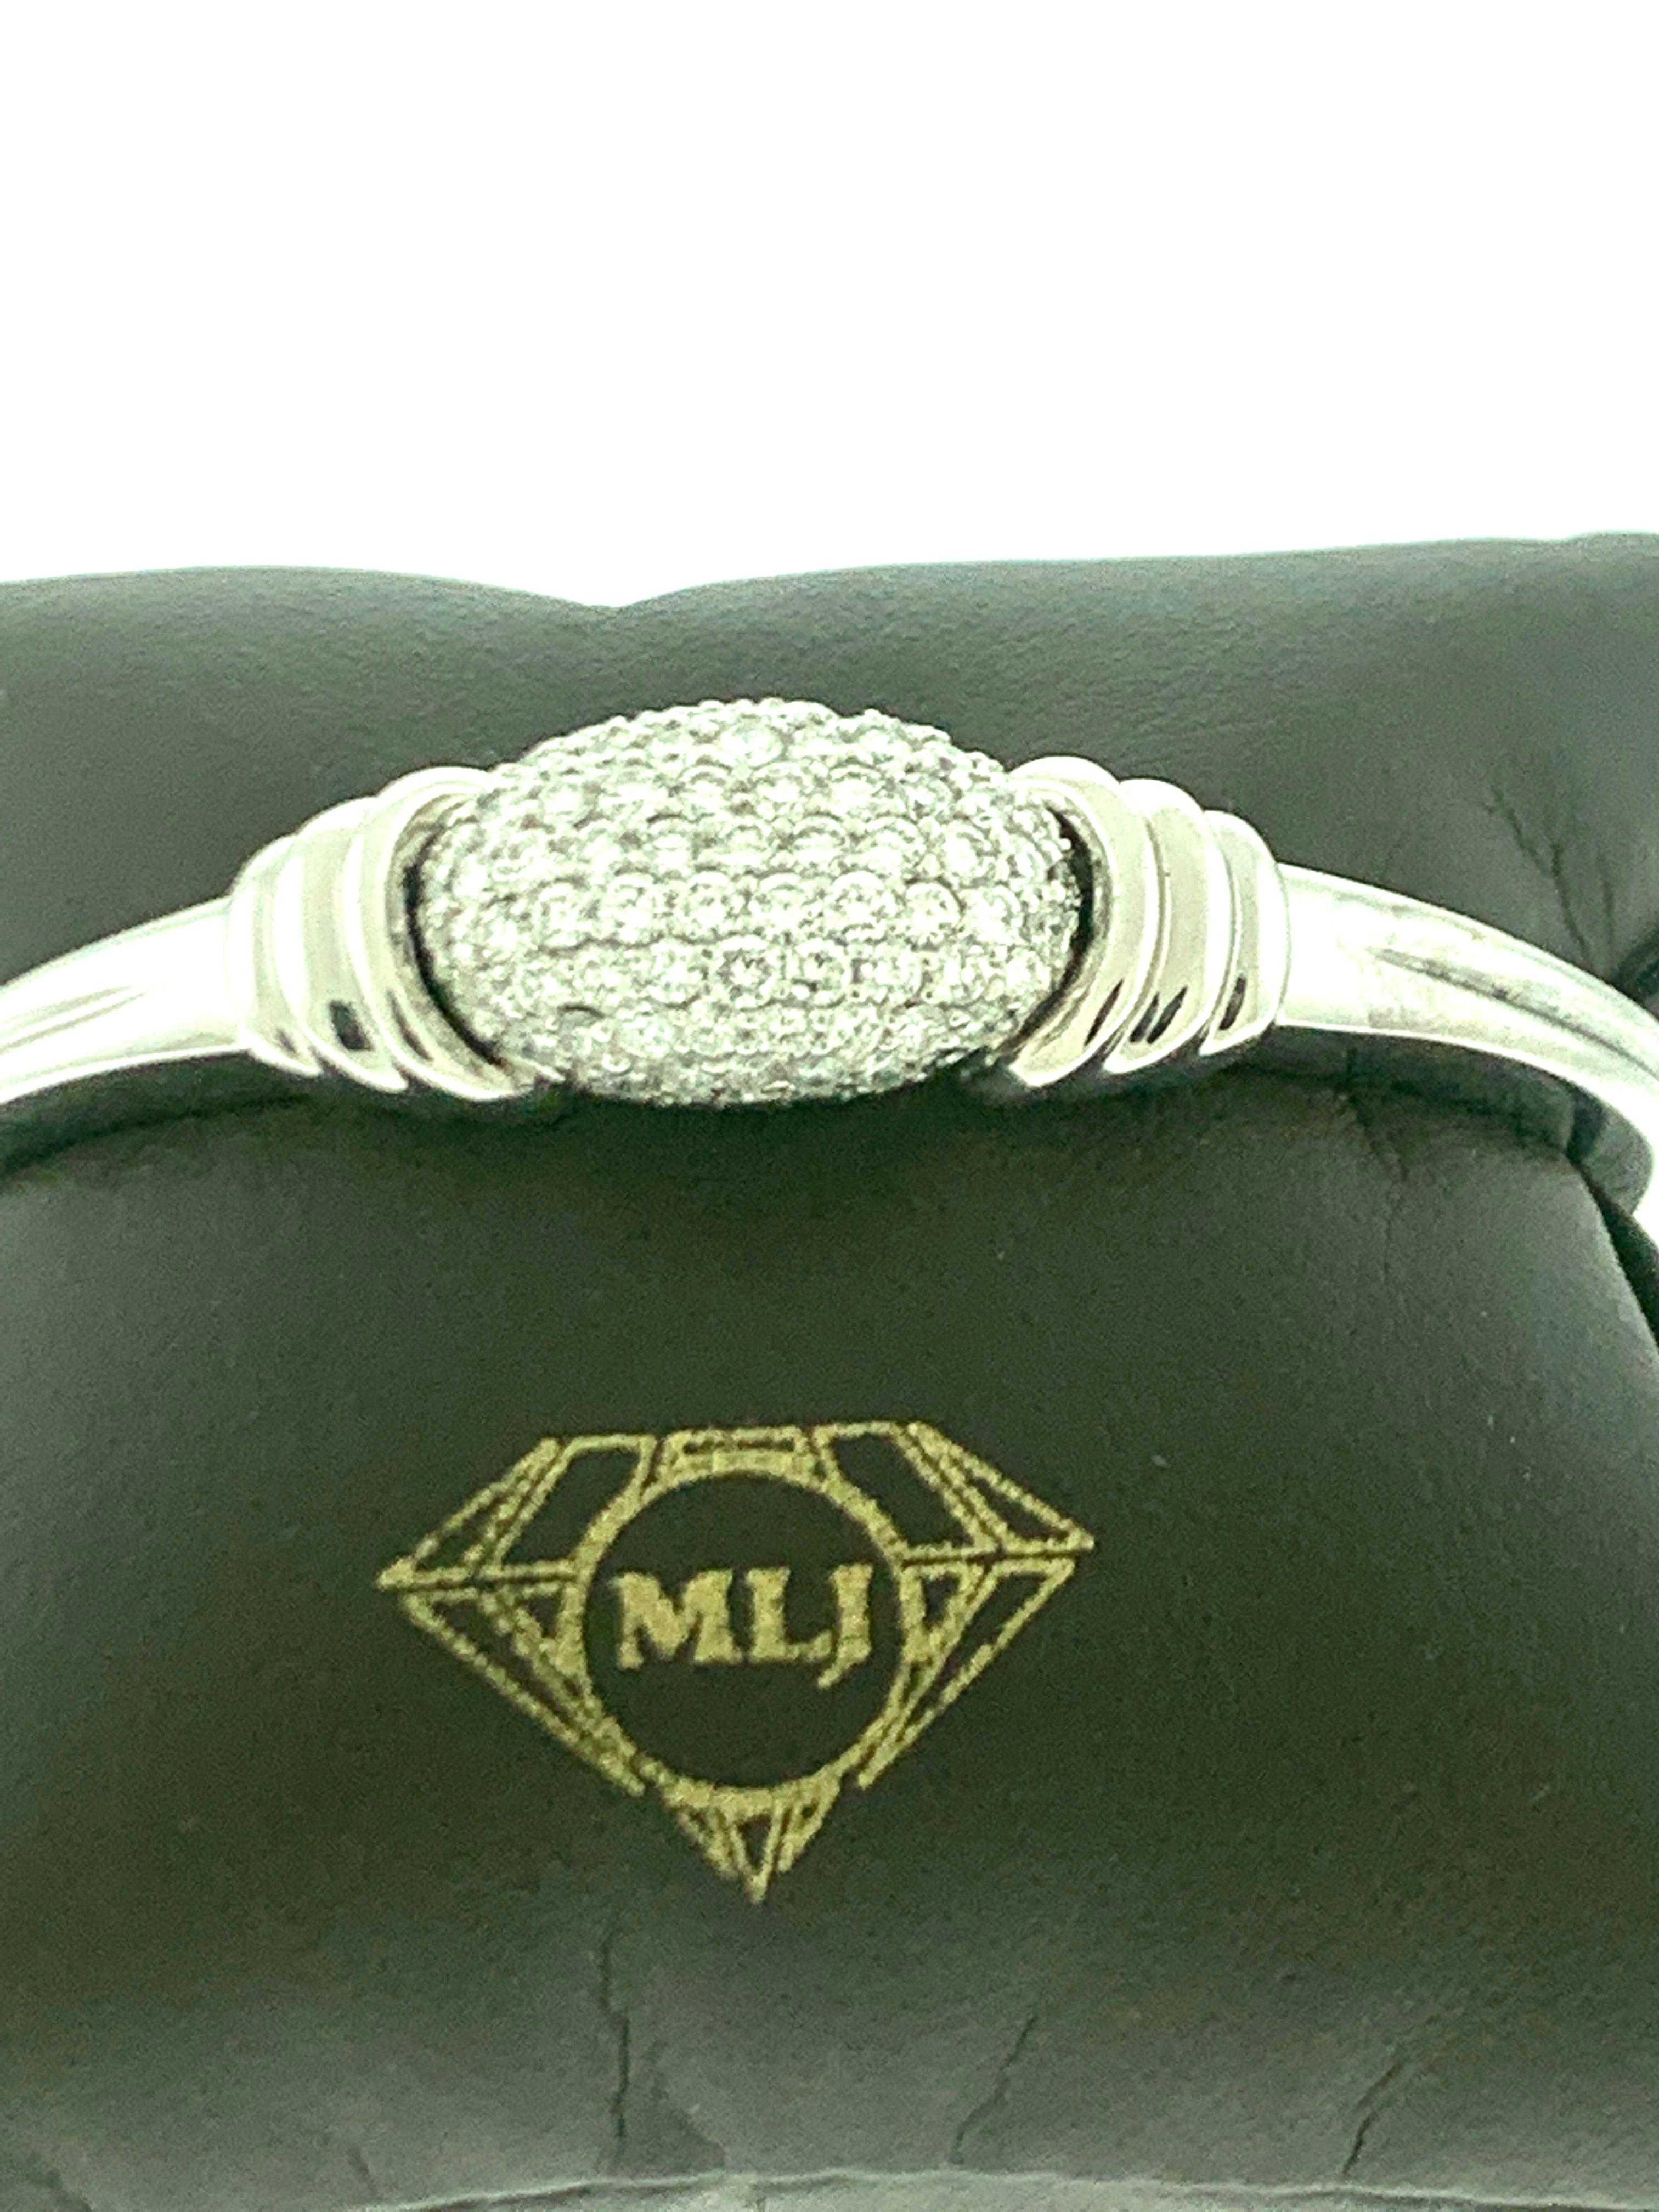 2.5 Carat Diamond Bangle /Bracelet in 18 Karat White Gold 32 Grams In Excellent Condition For Sale In New York, NY